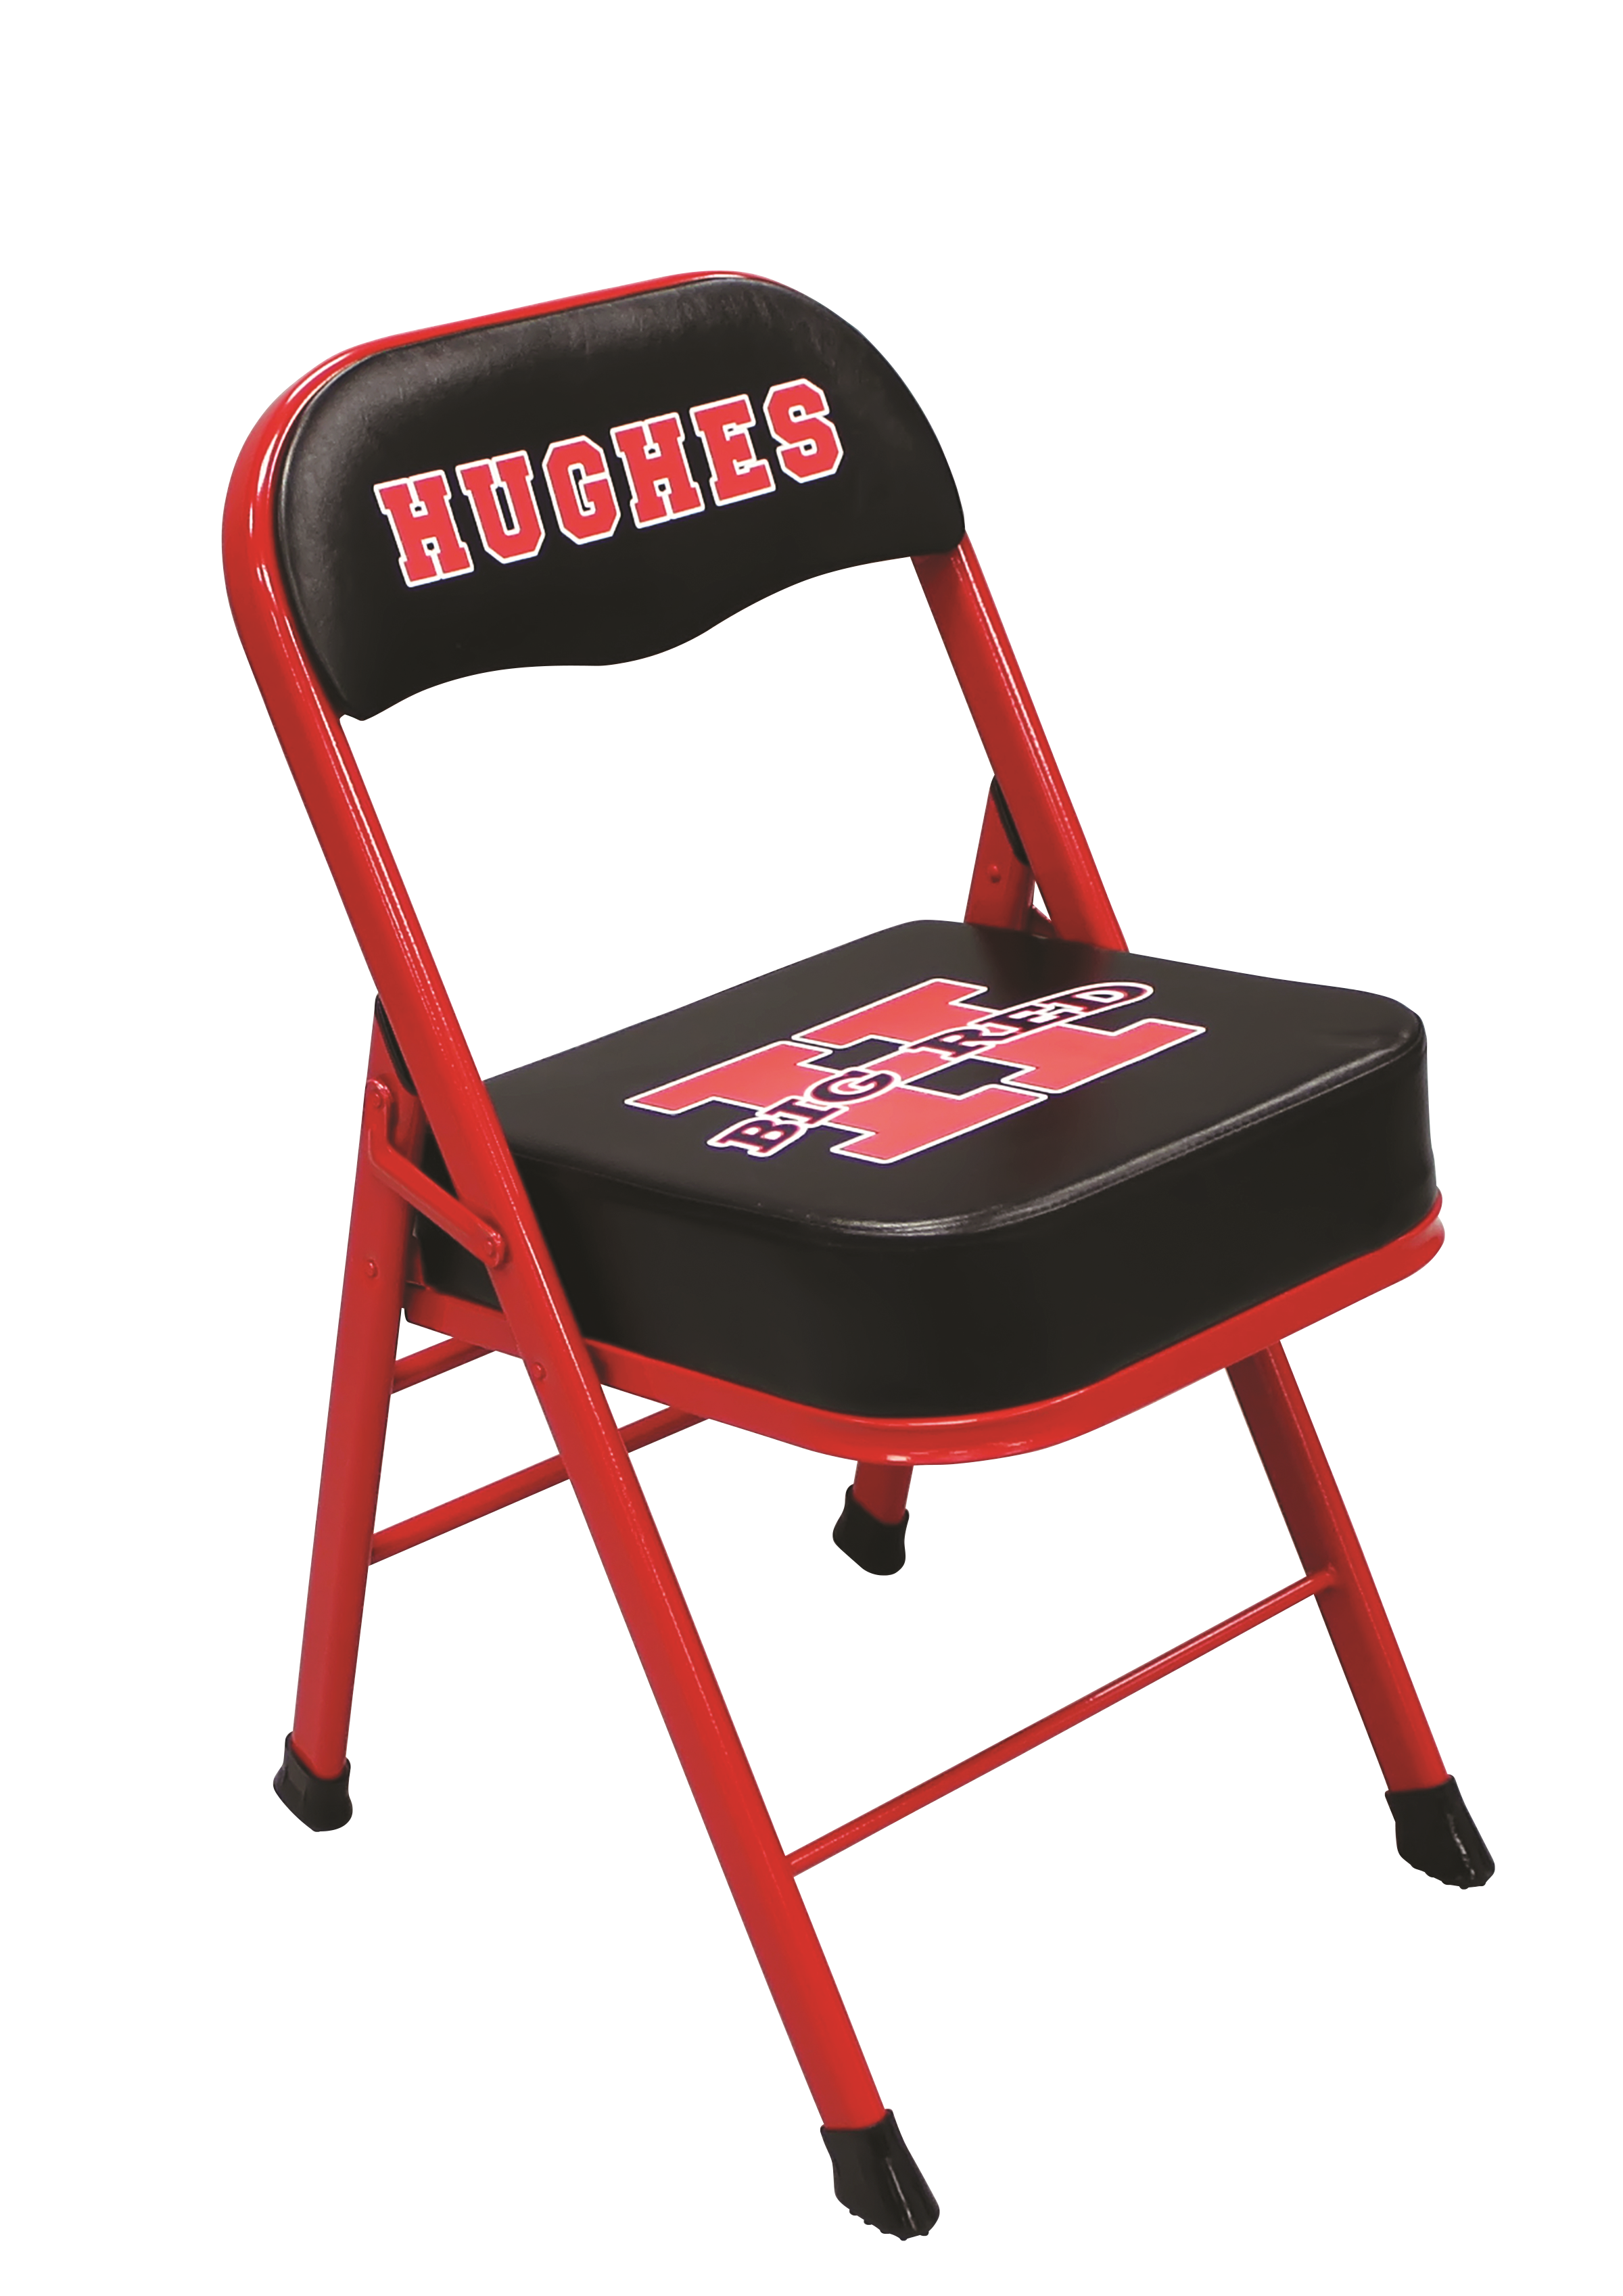 Deluxe sideline chair